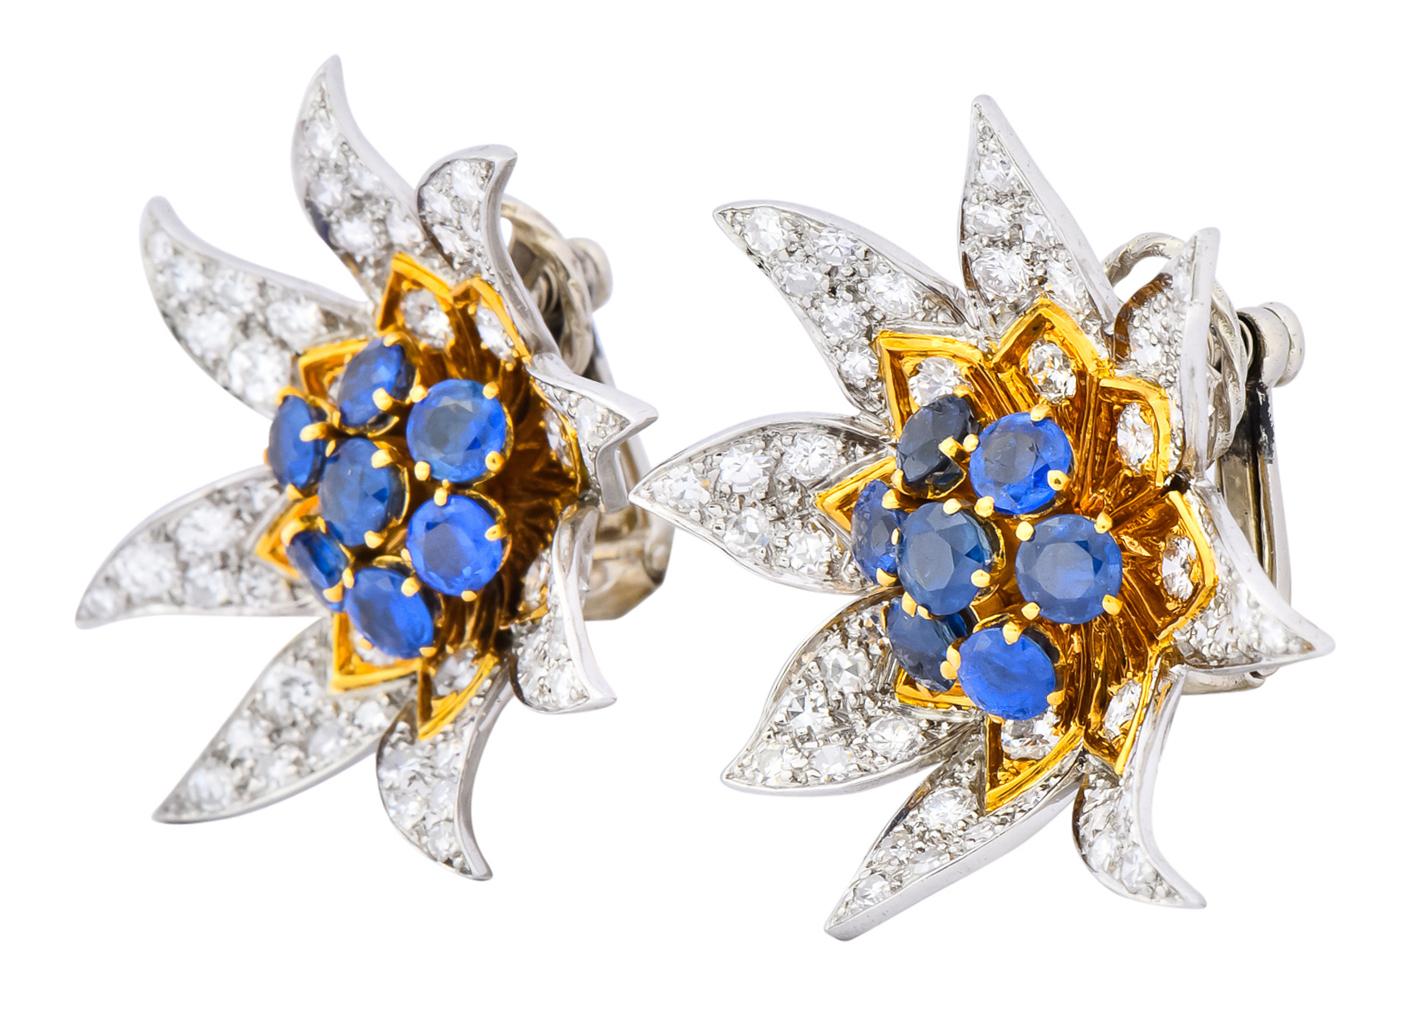 Each designed as a flower with petals featuring pavé set round brilliant cut  diamonds weighing approximately 2.72 carats total, E-F color and VVS-VS clarity

Polished gold petal accents and bright vivid blue sapphires in bead set gold